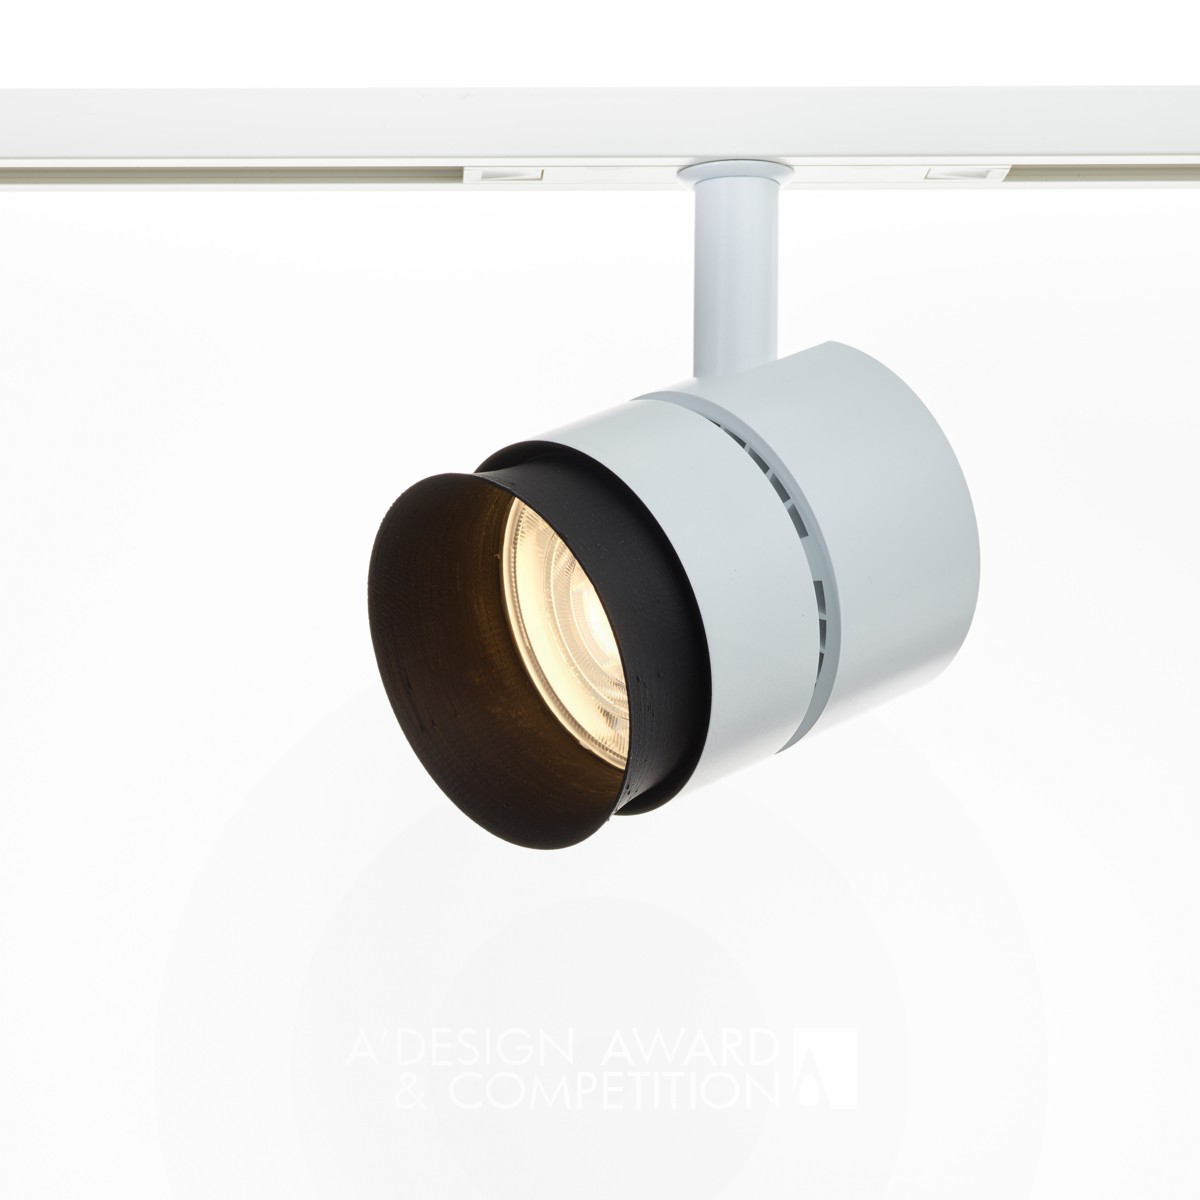 Christian Schneider-Moll low voltage LED track light with XICATO 